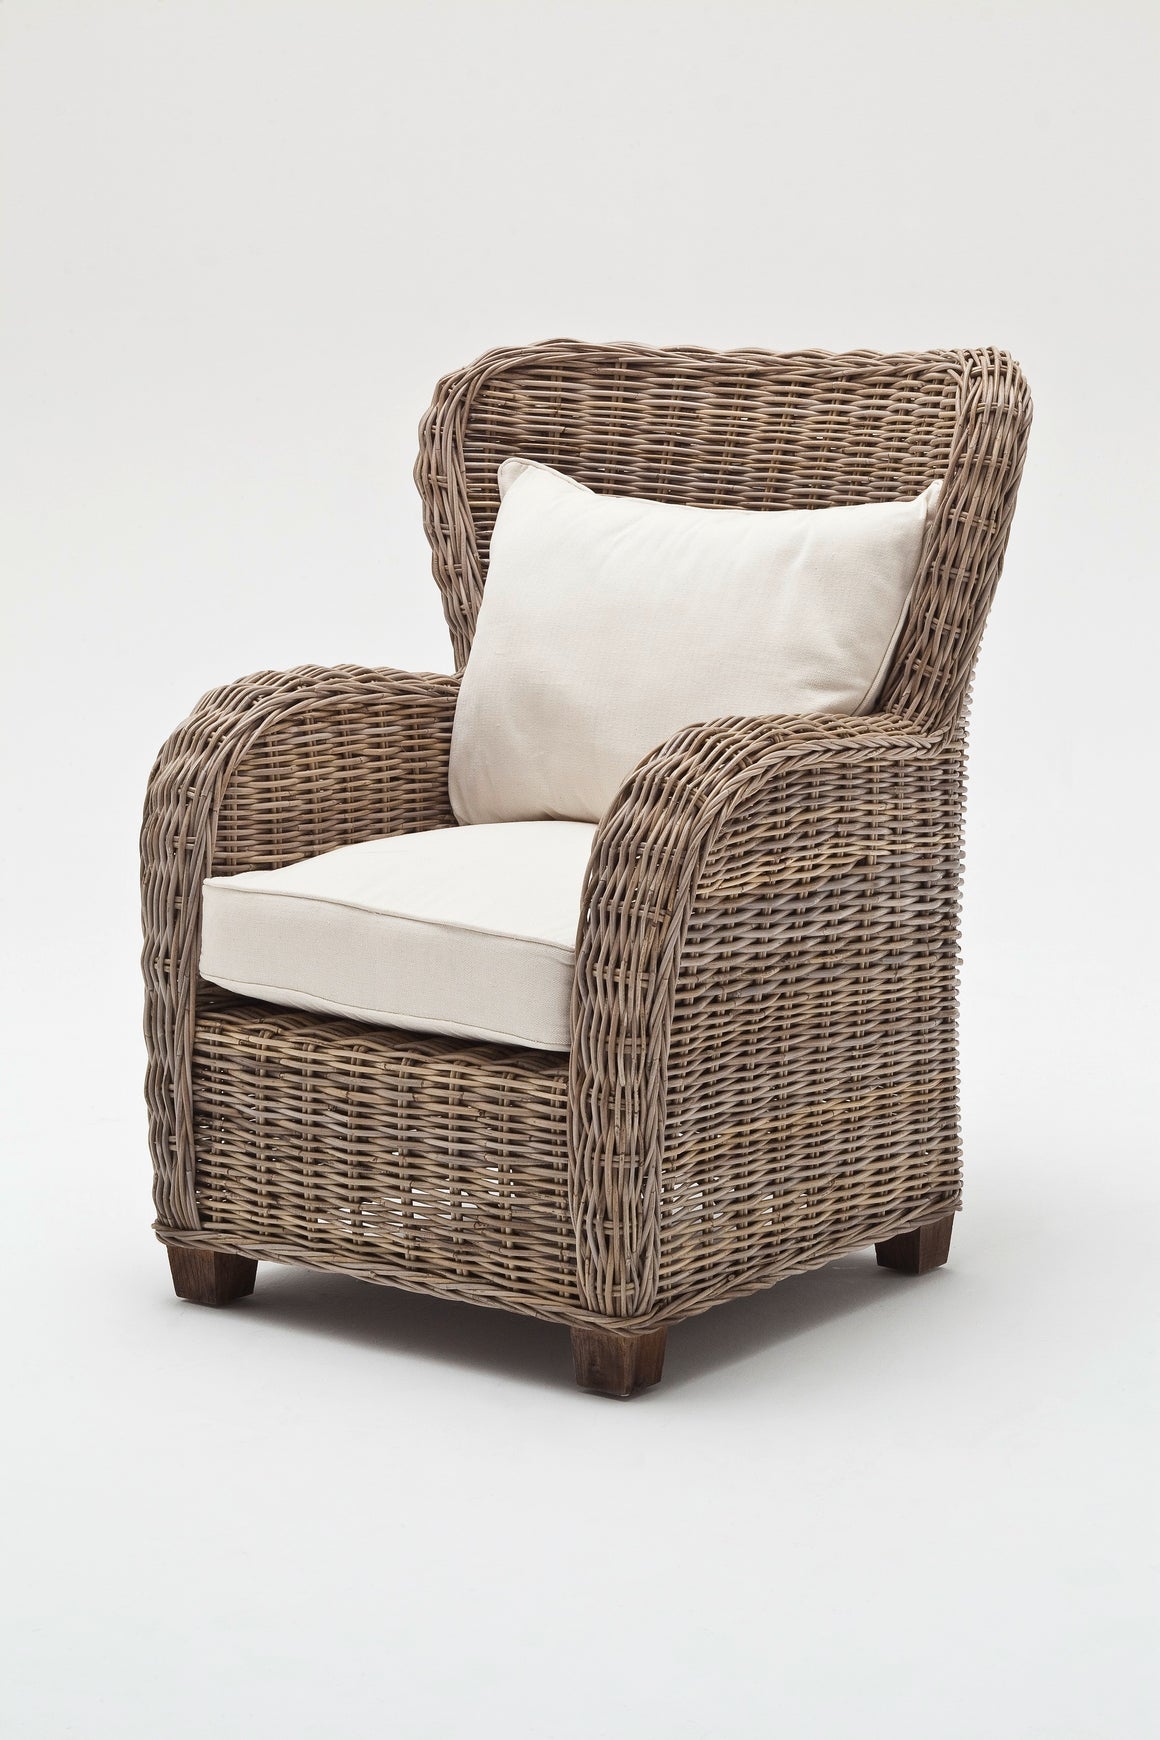 Wickerworks CR42 Queen Chair With Seat and Back Cushions